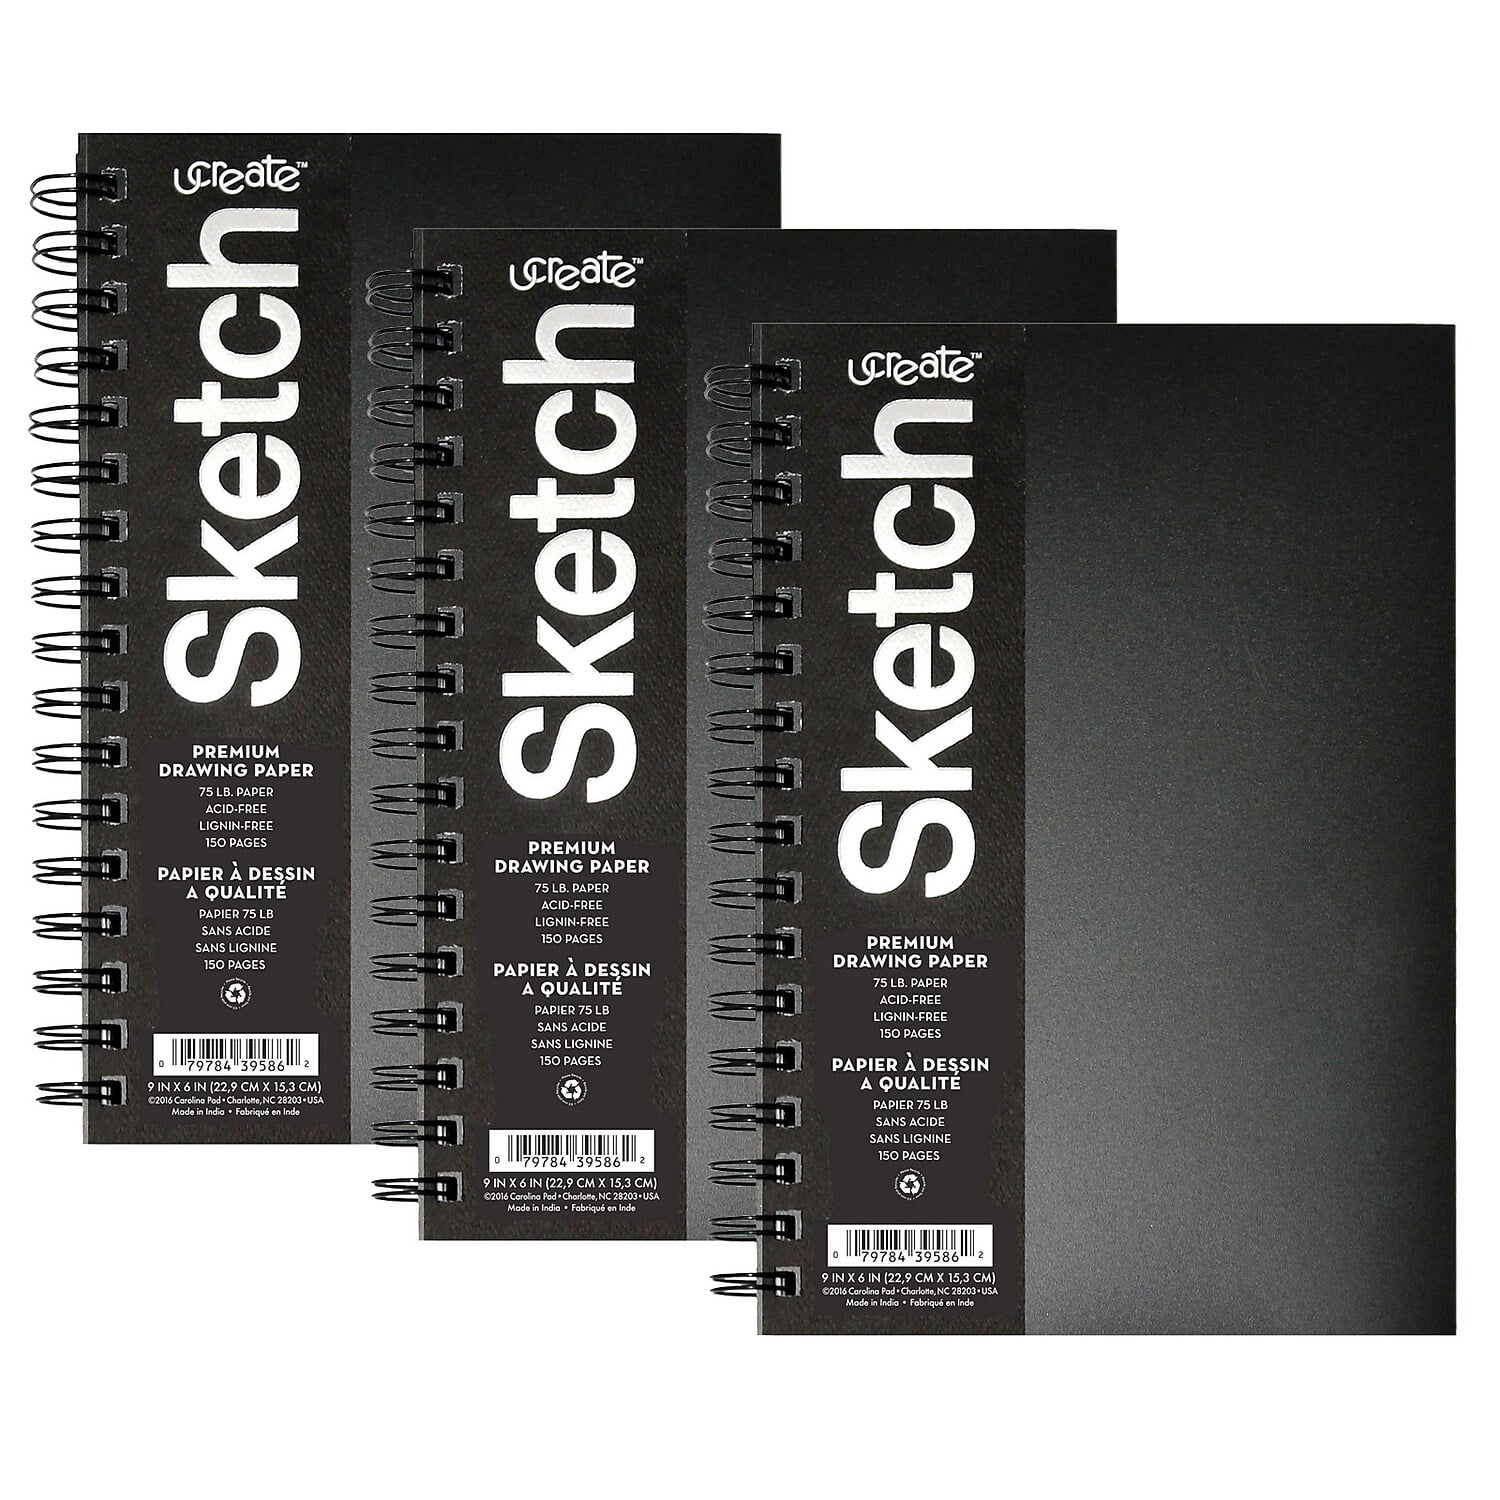 The Body Sketch Book - Case of 20 Books – Memento Publishing